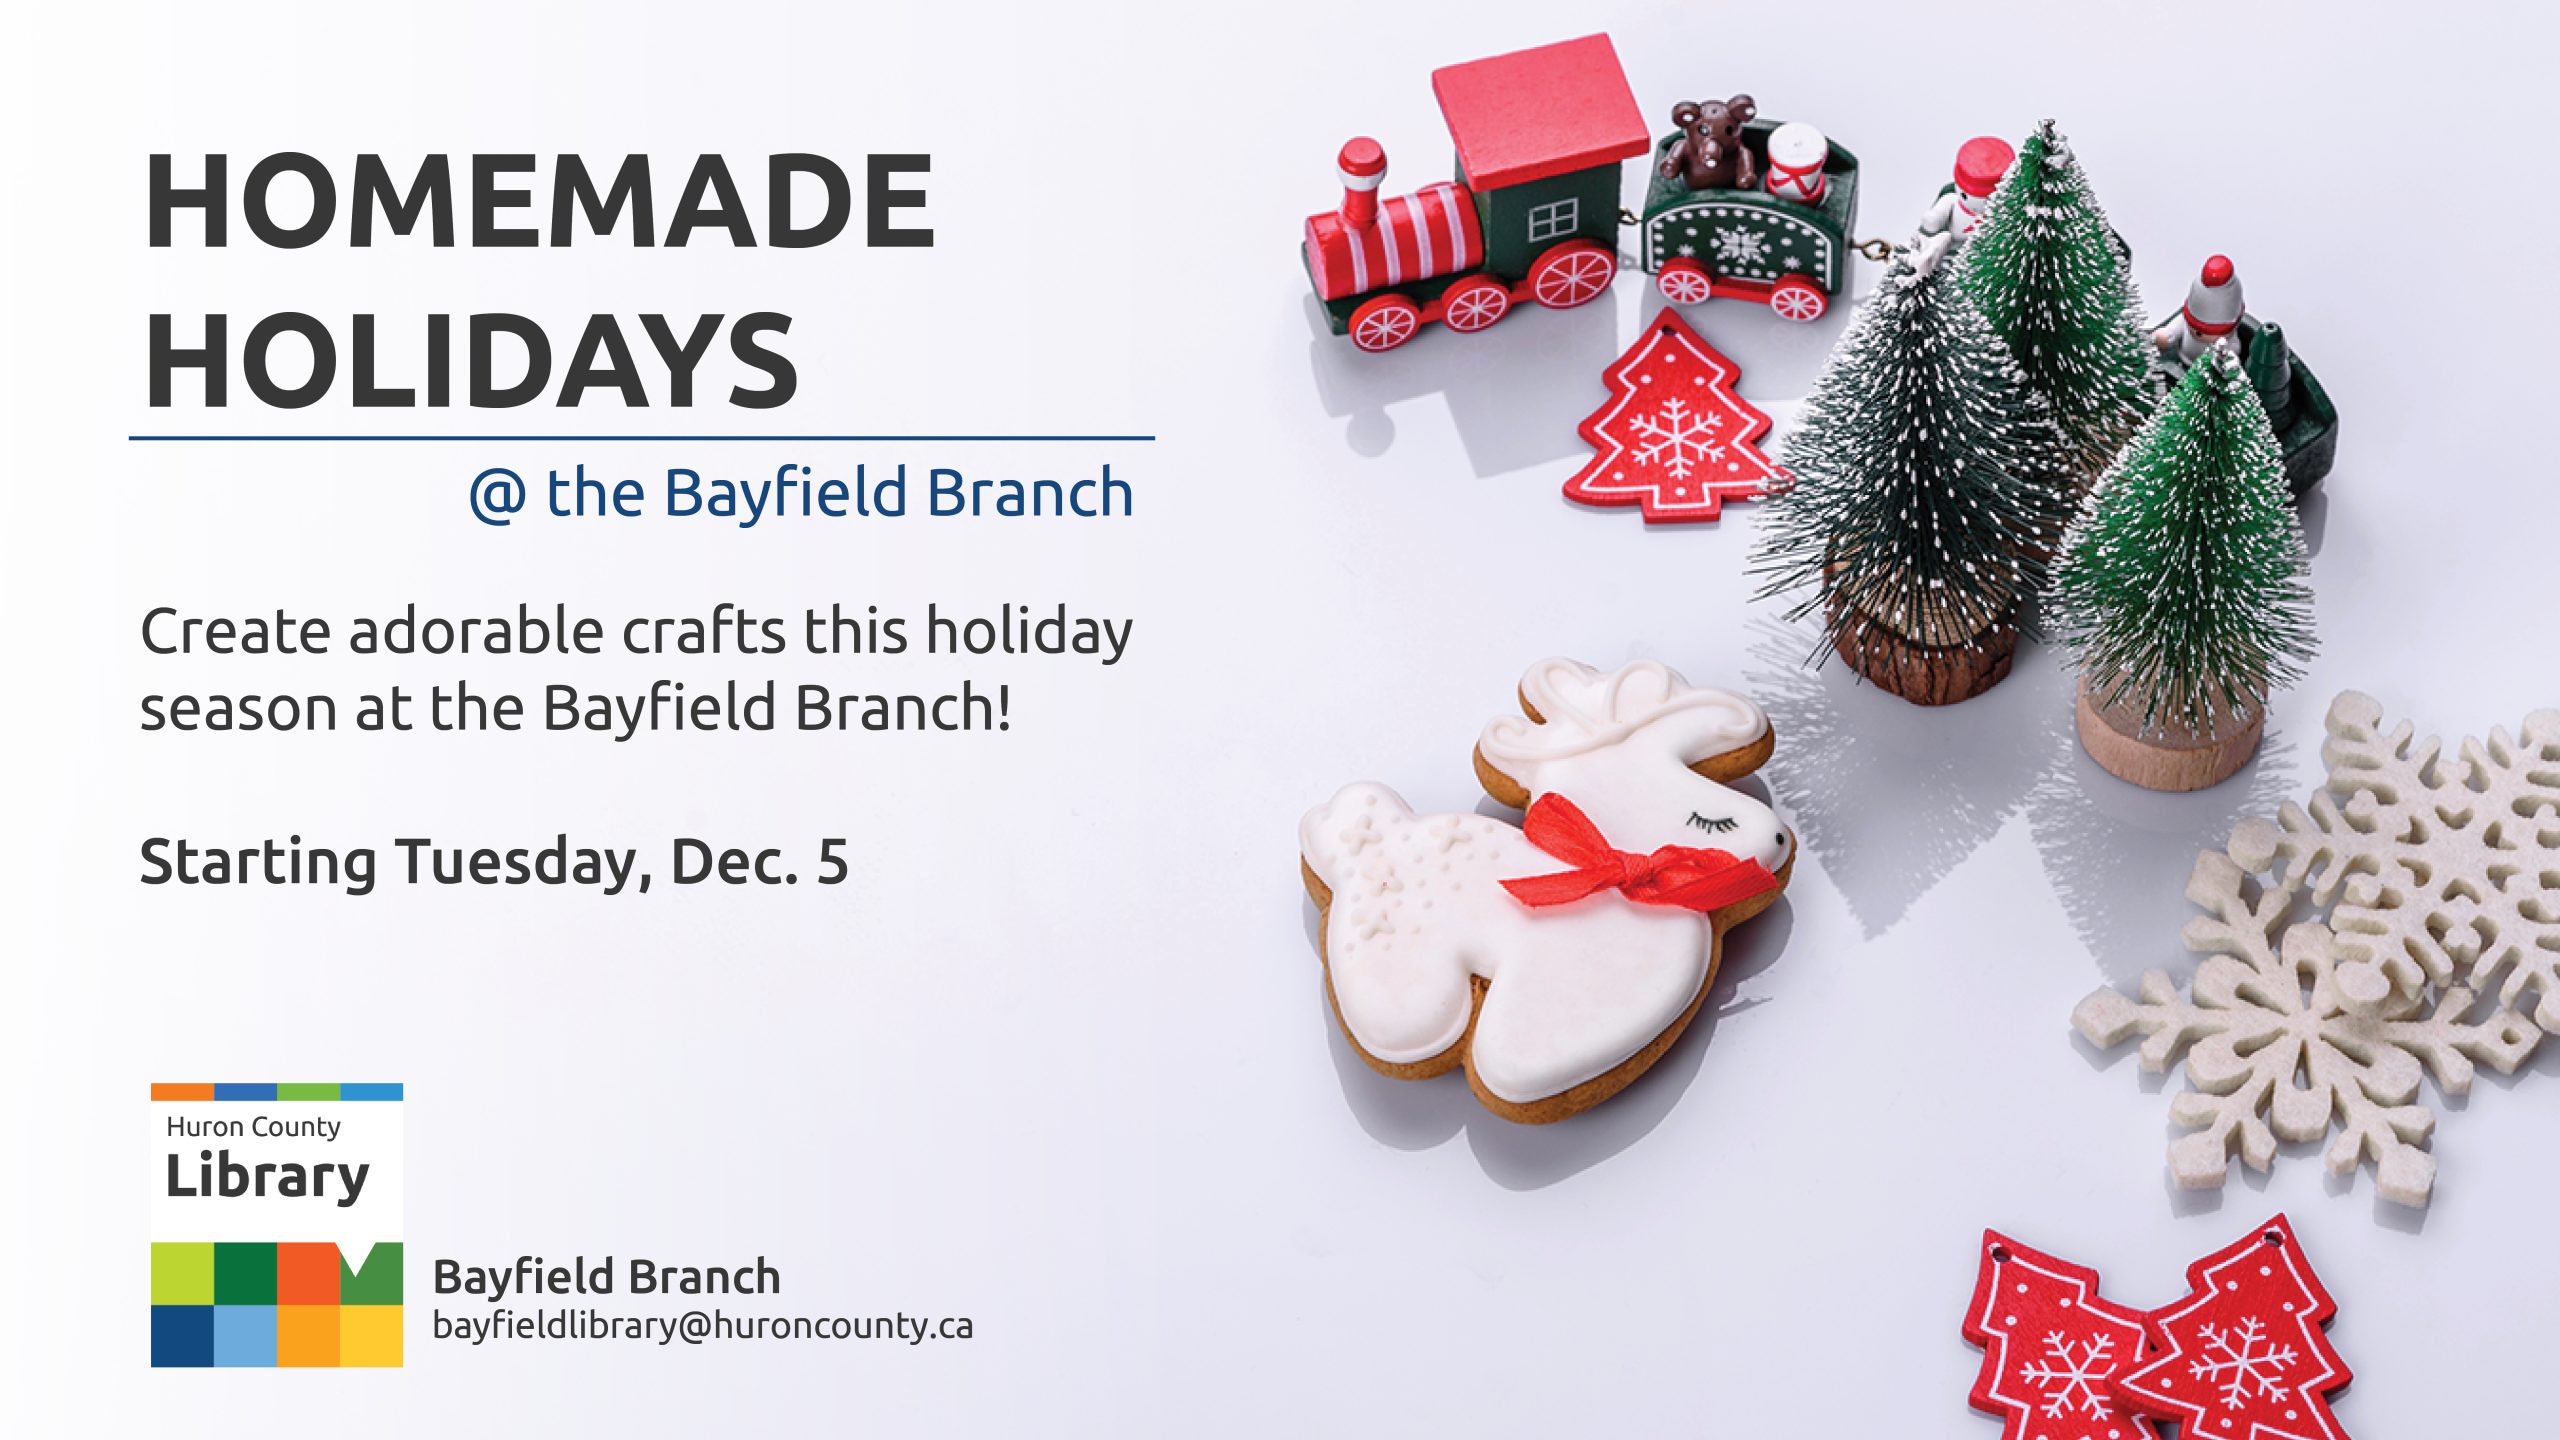 Photo of Christmas decorations with text promoting Homemade Holidays series at Bayfield Branch